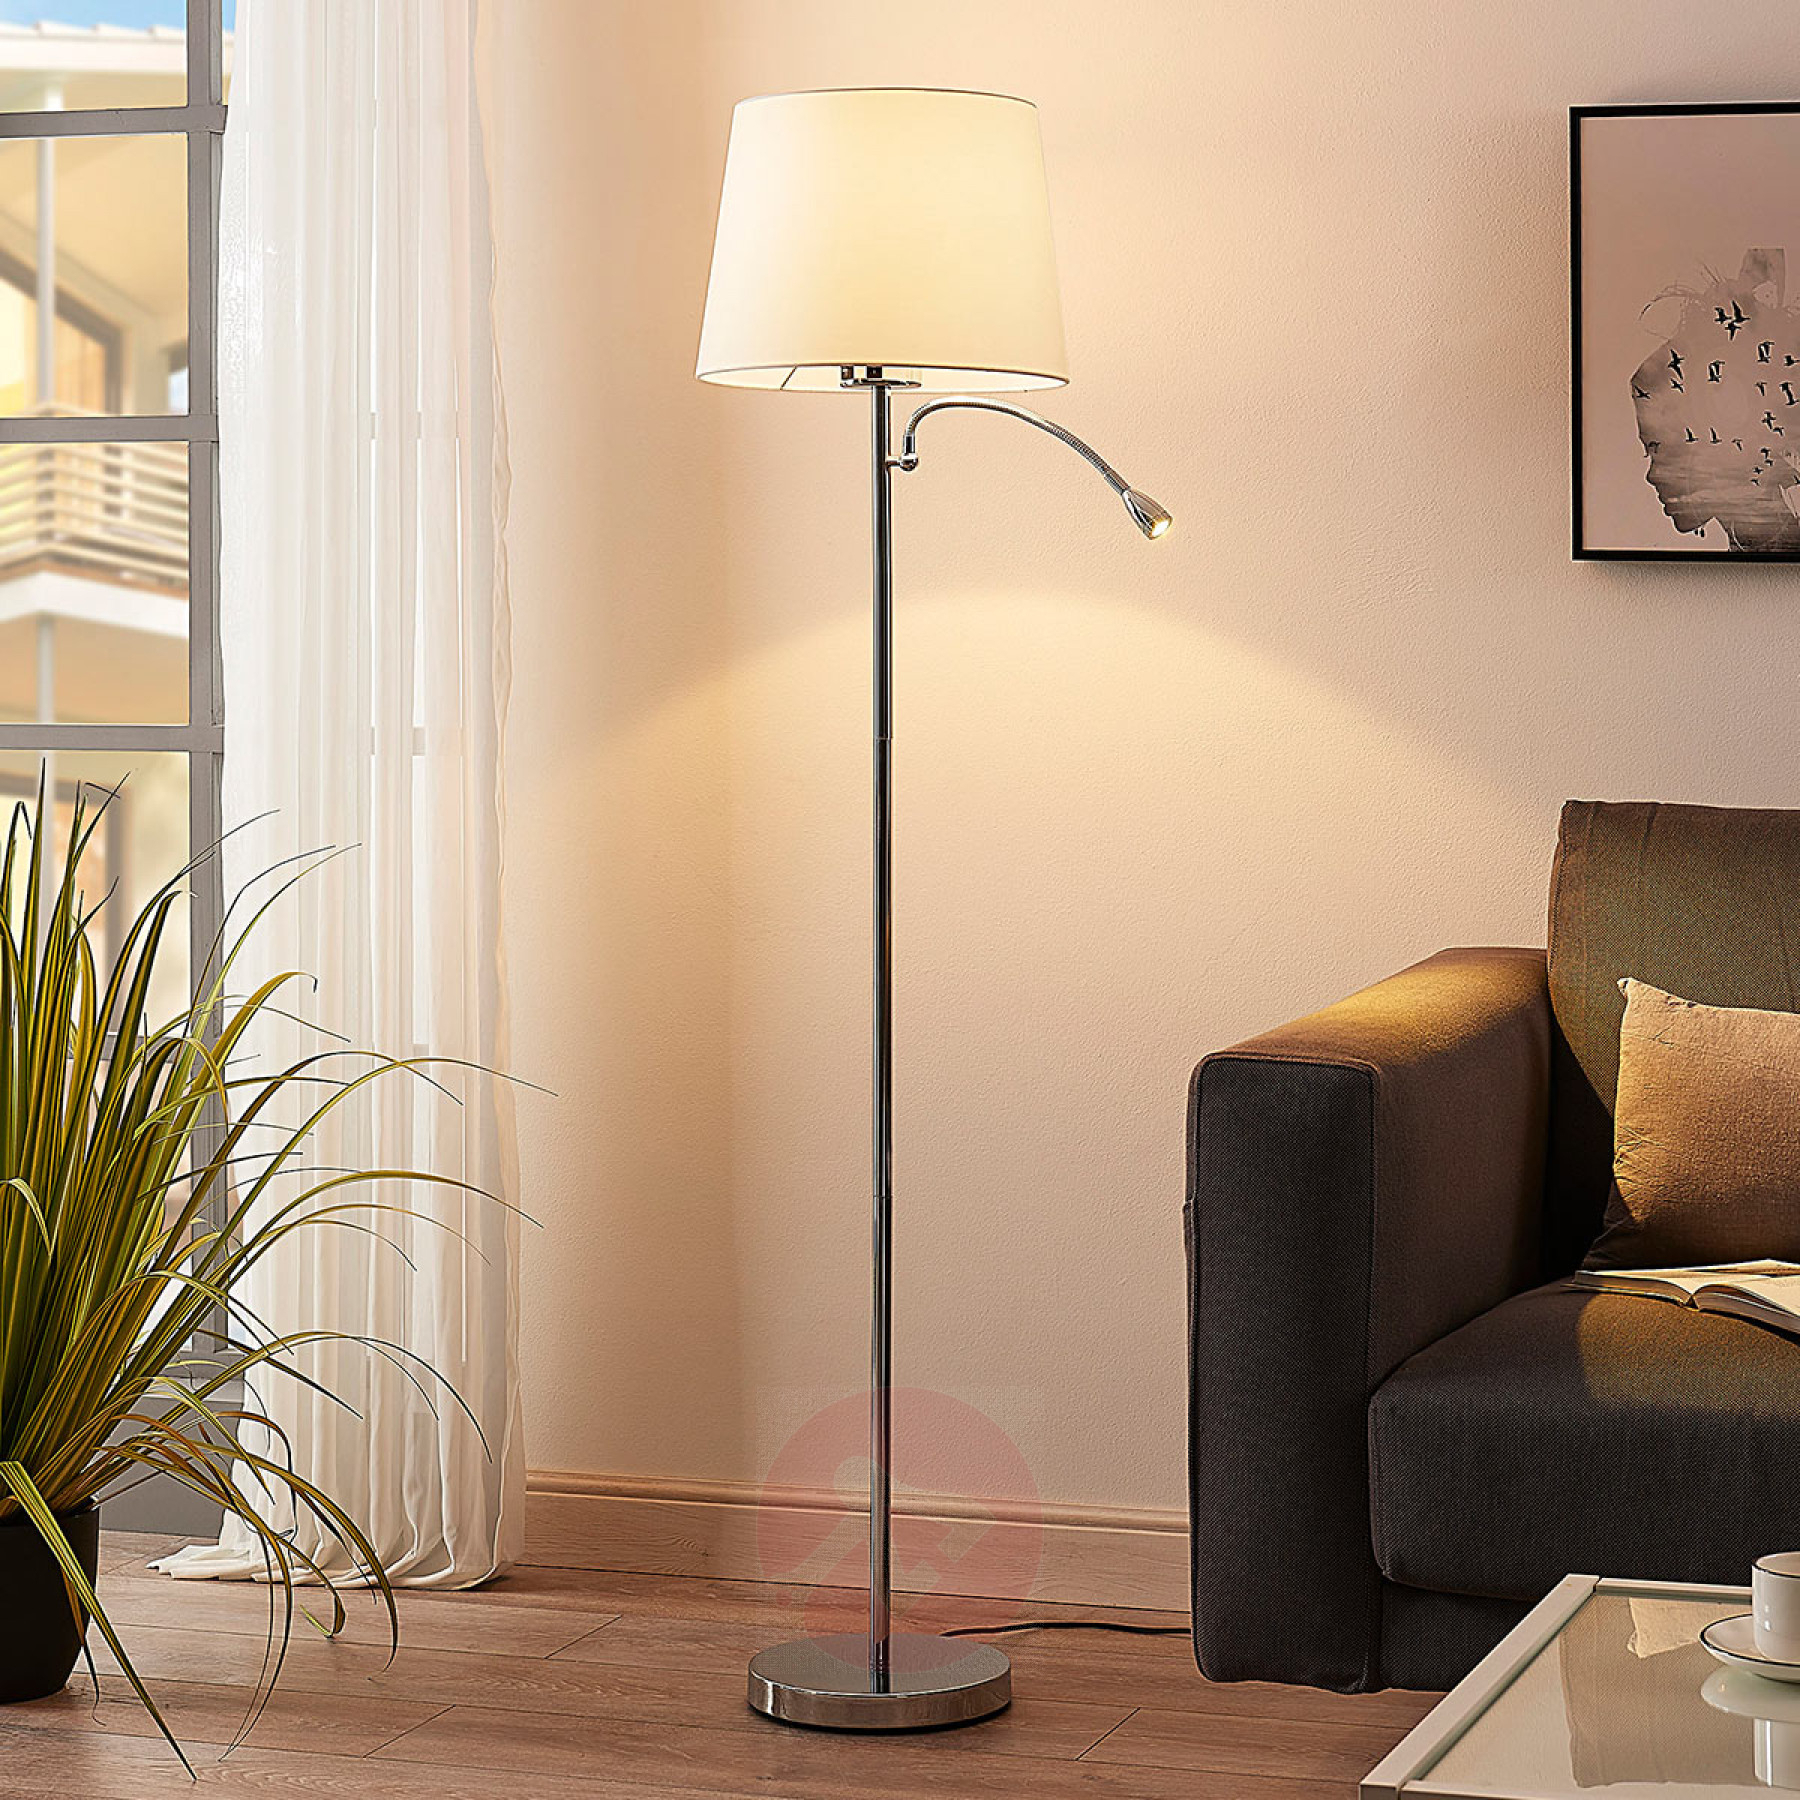 Lamps Tall Light Lamp Teal Floor Lamp Good Reading Floor within sizing 1800 X 1800